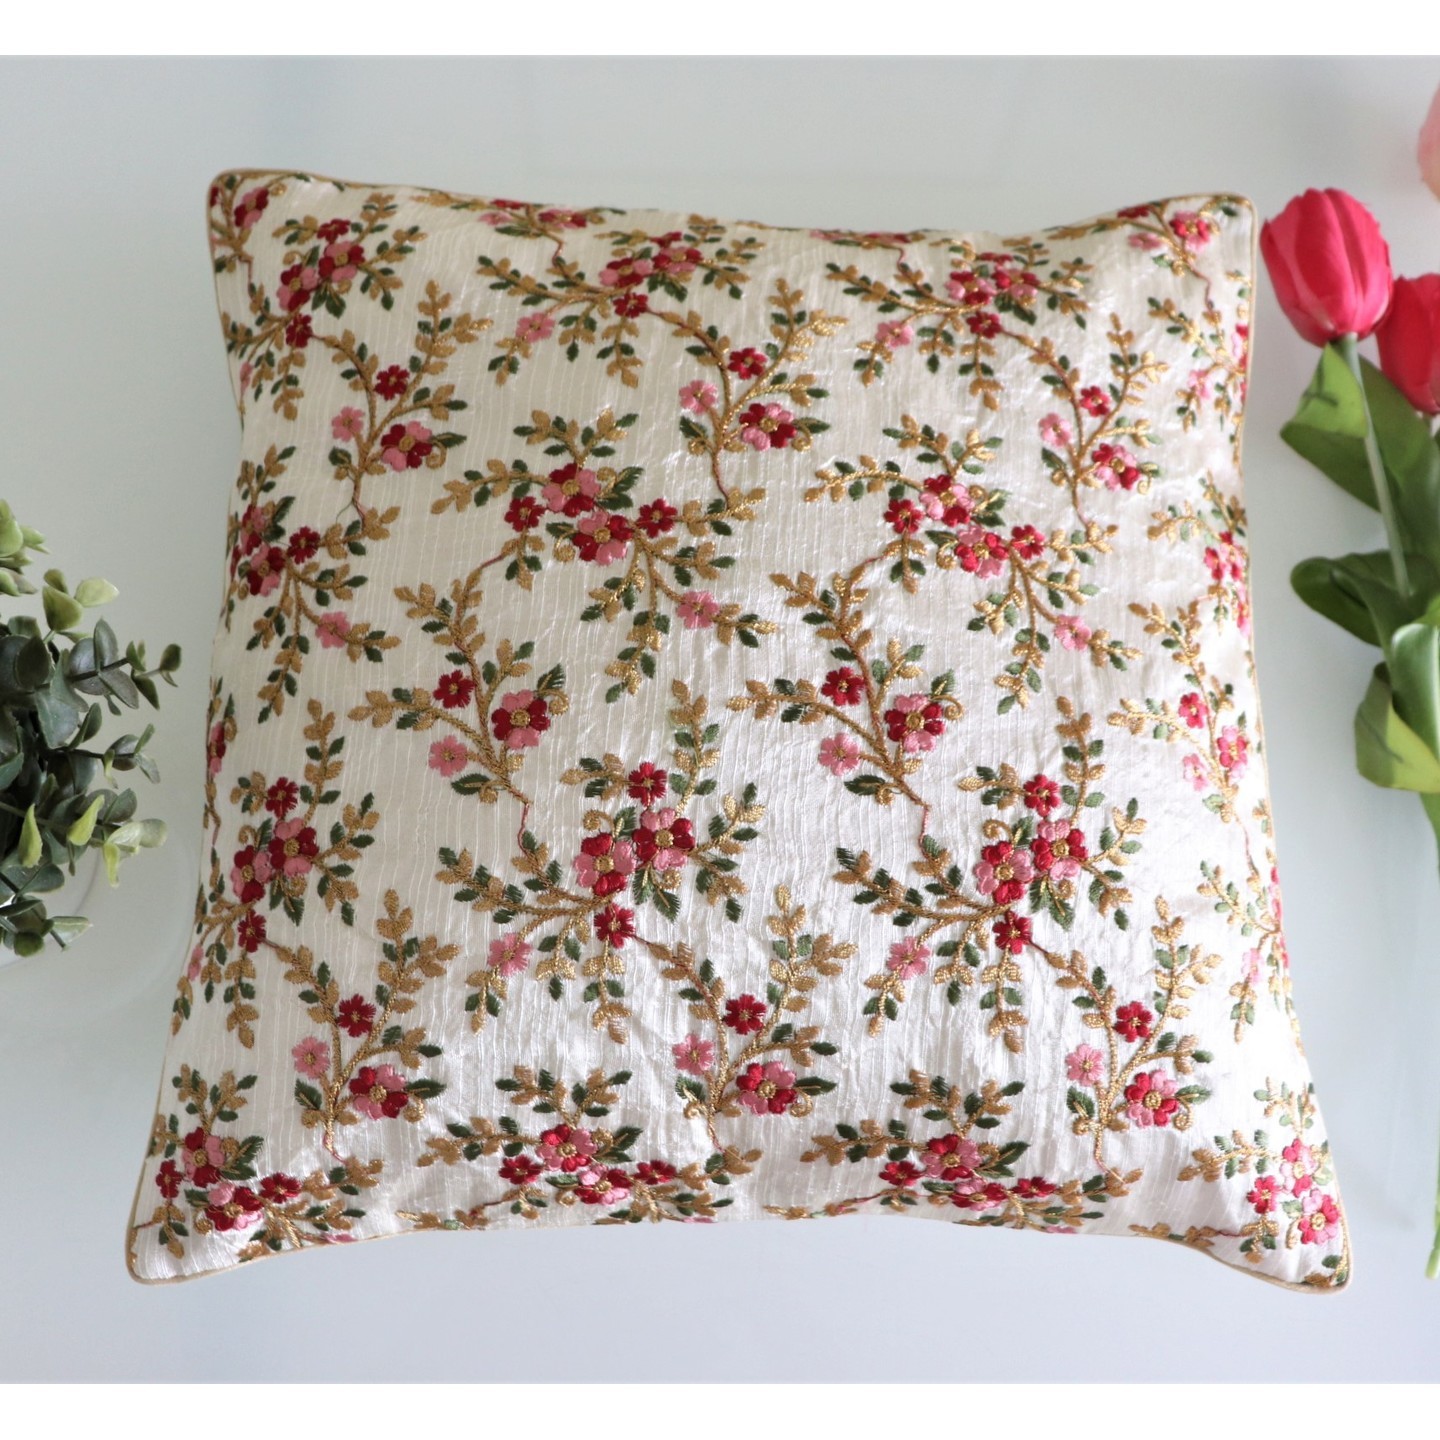 Blossoms Embroidered 40cmsx40cms Cushion Cover